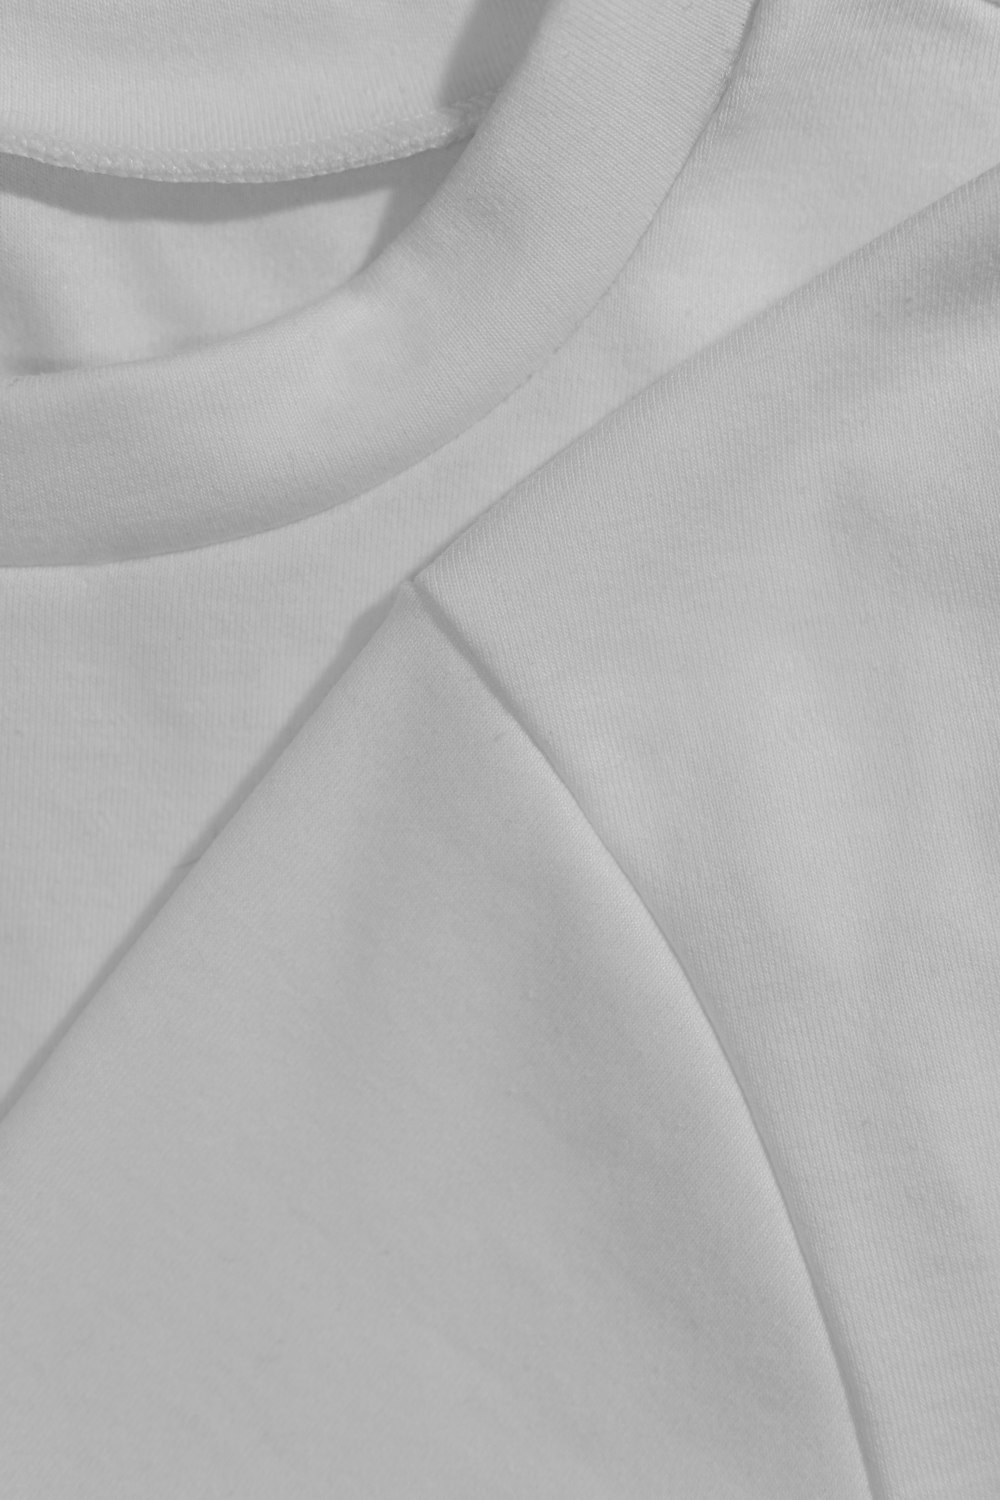 white textile in close up image